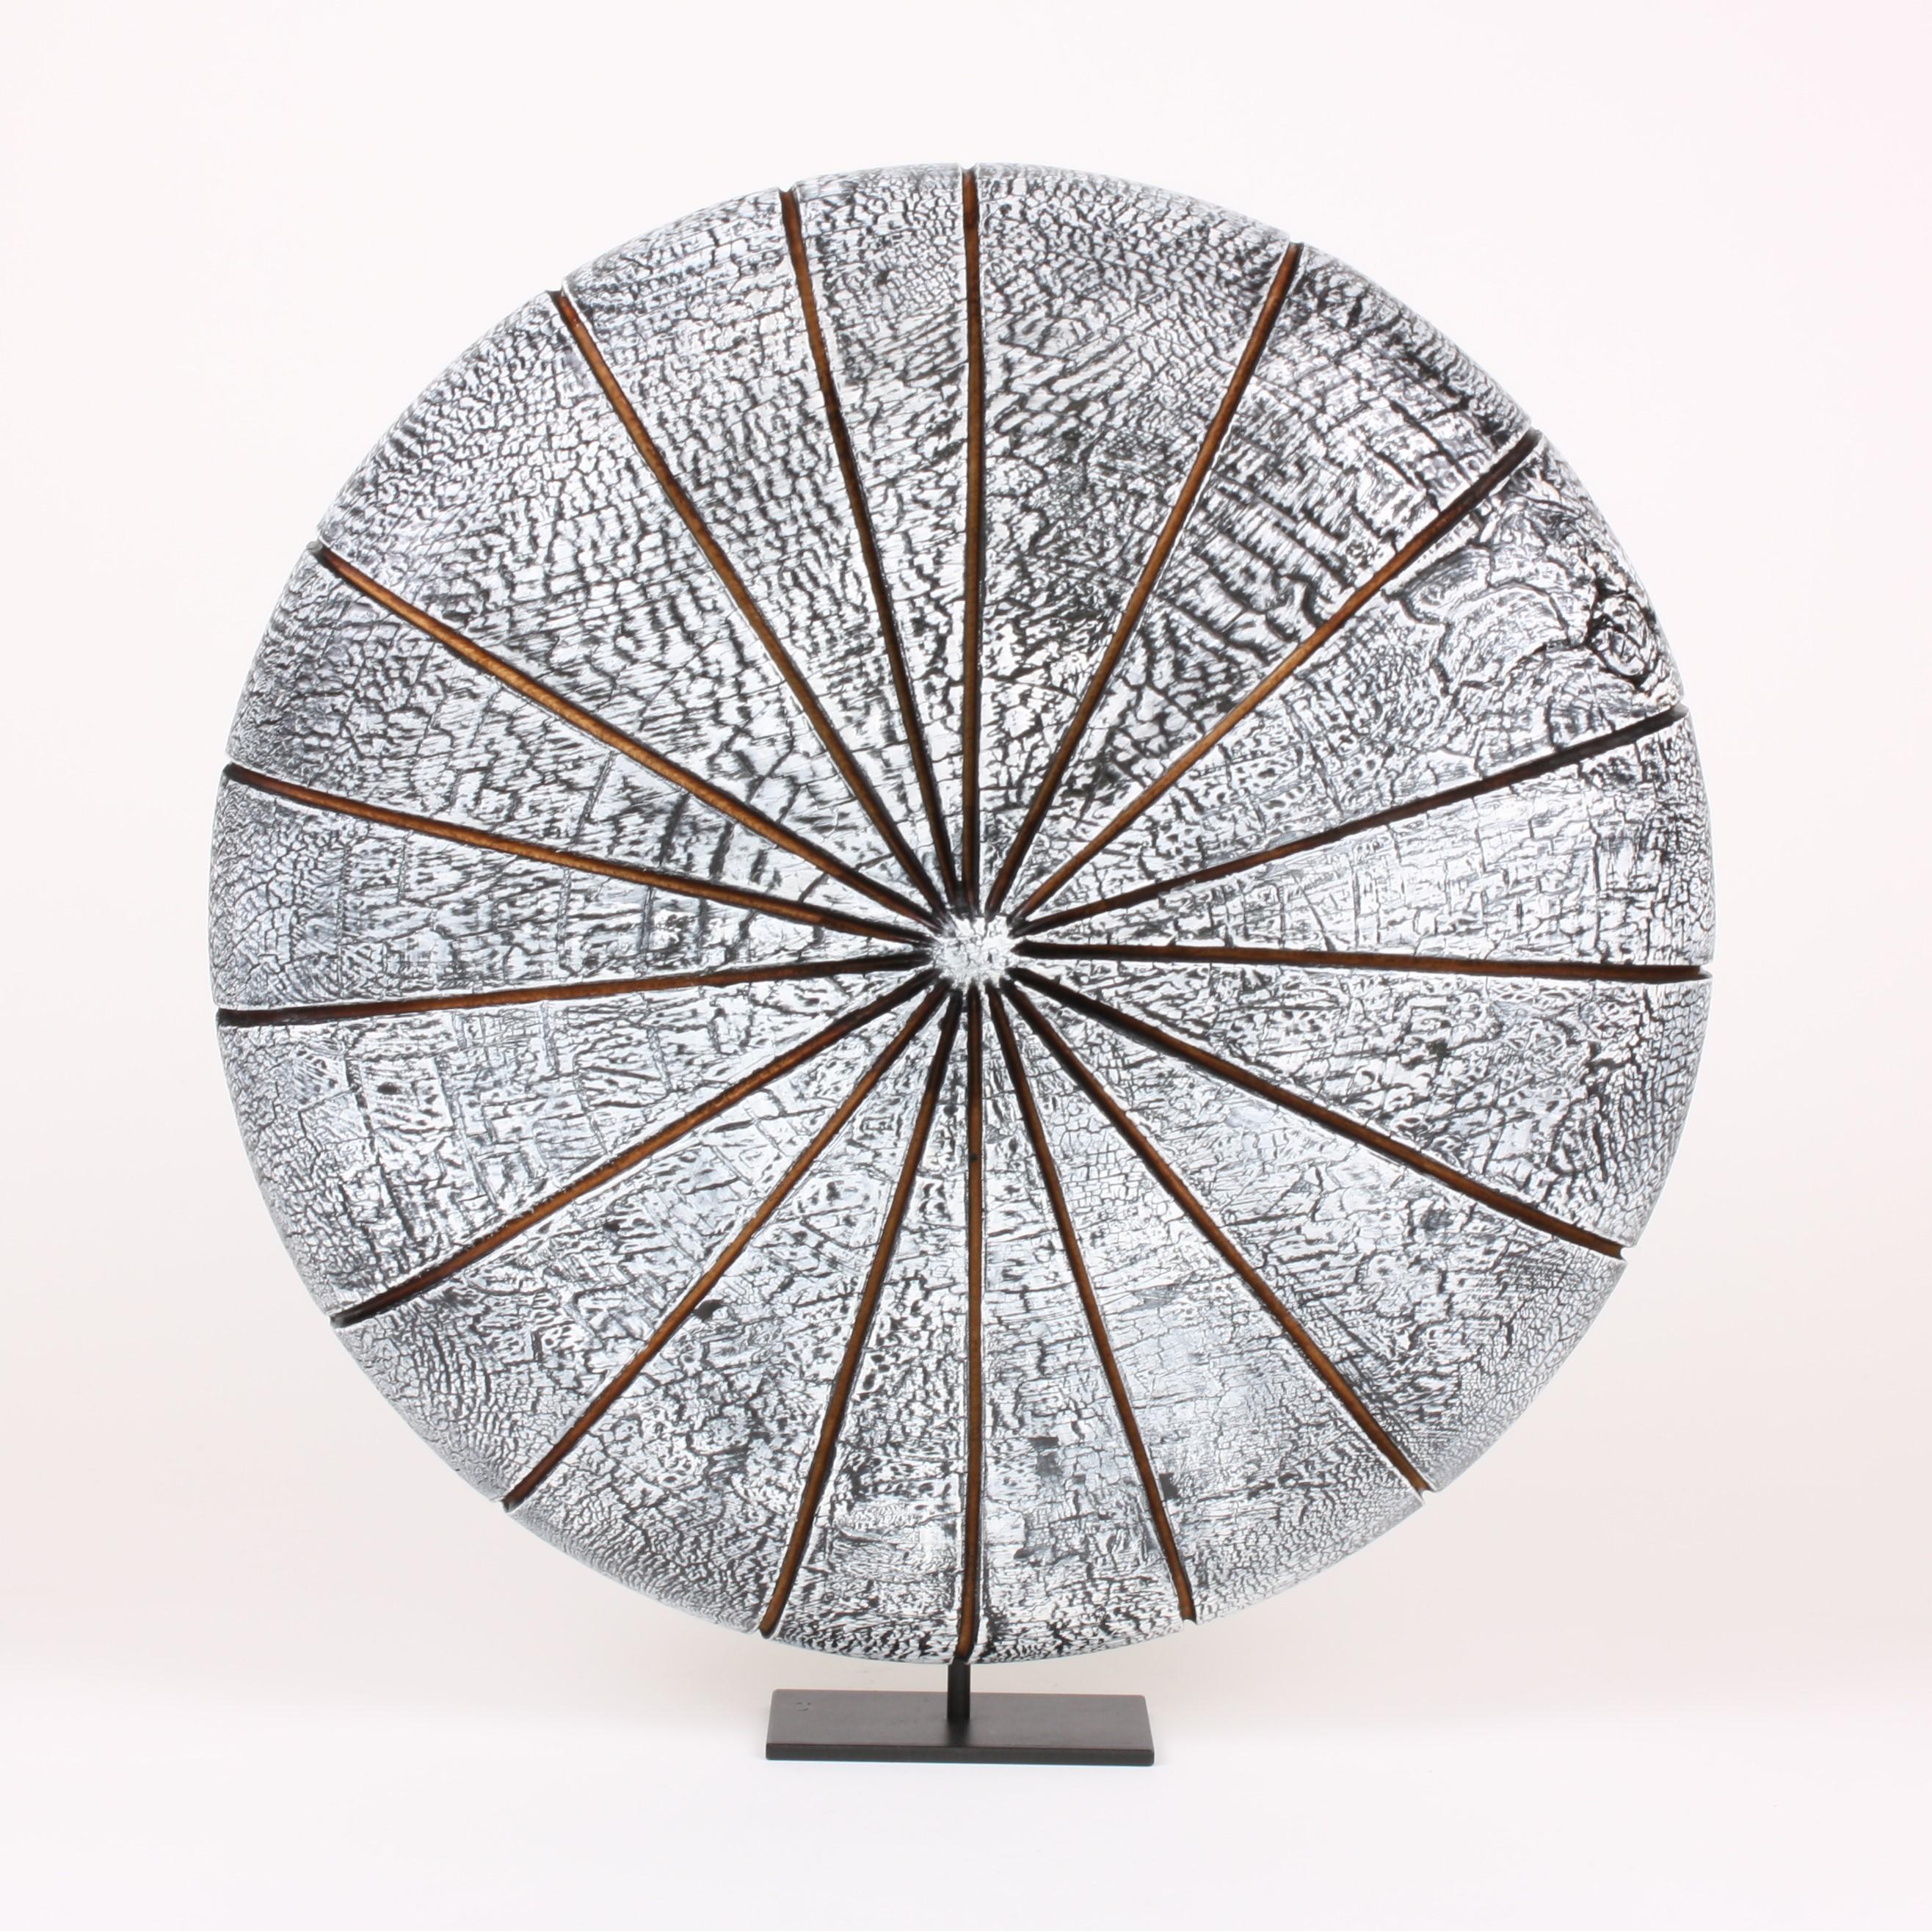 Beautifully textured contemporary white wood sculpture in the shape of a disk on a metal stand. Artist Natacha Heitz finds the primary material for her extraordinary crackled wood sculpture in the Arolla pine. After turning her wood to form